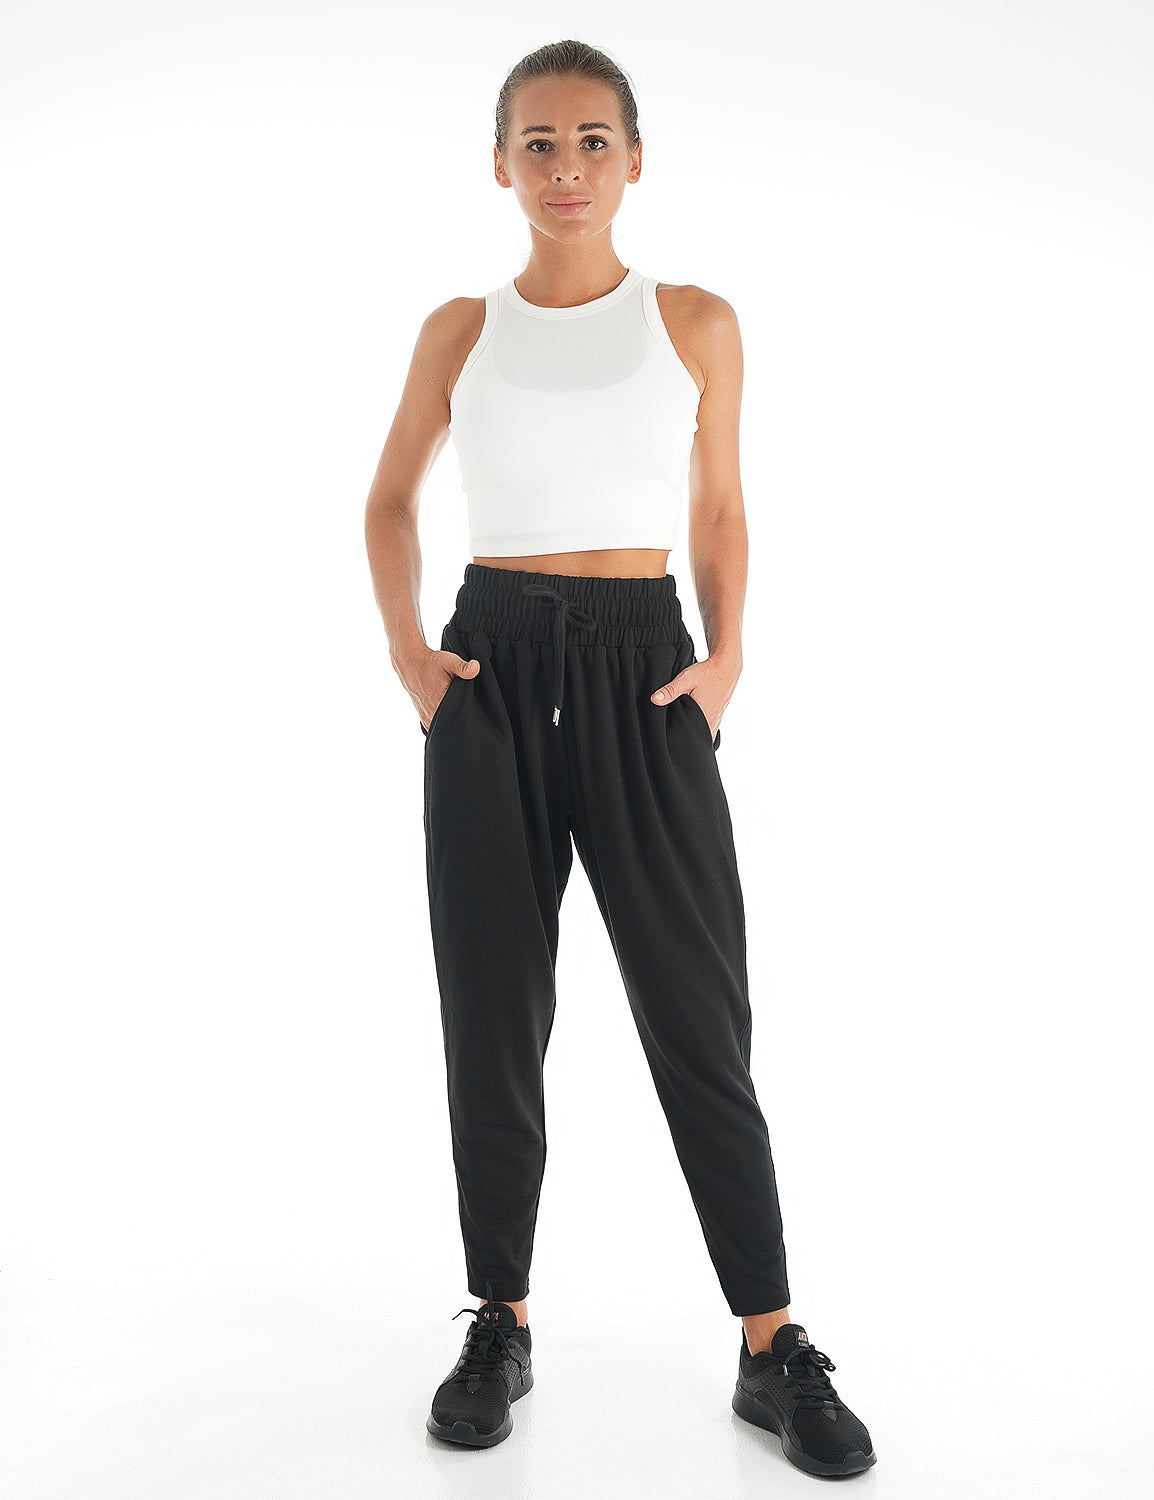 Blooming Jelly_Outdoor Sweatpants Casual Joggers_Black_255098_08_Women Sportswear Comfy Outfits_Bottoms_Joggers